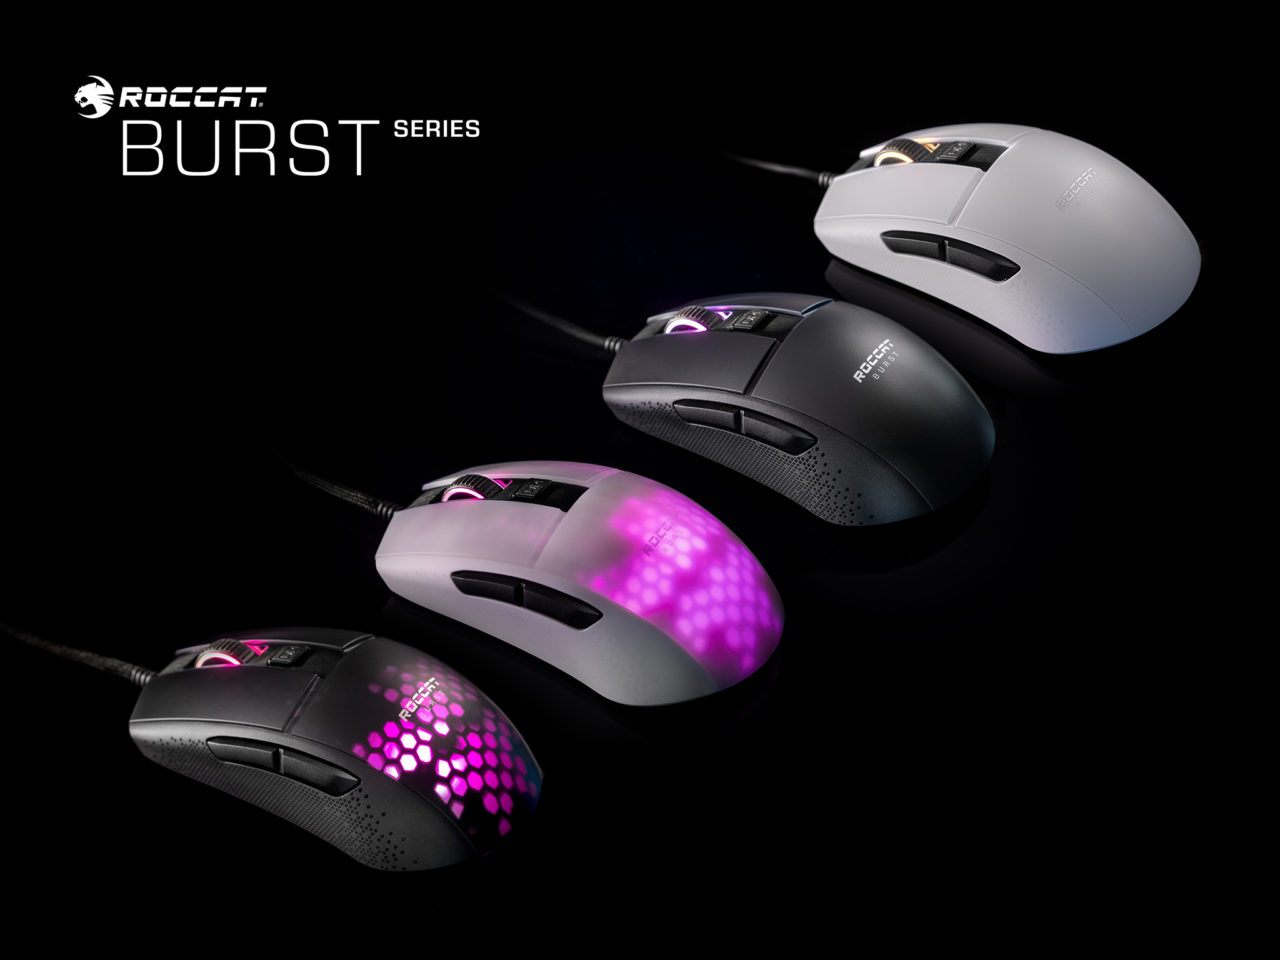 Burse Series Gaming Mouse product image (Roccat)